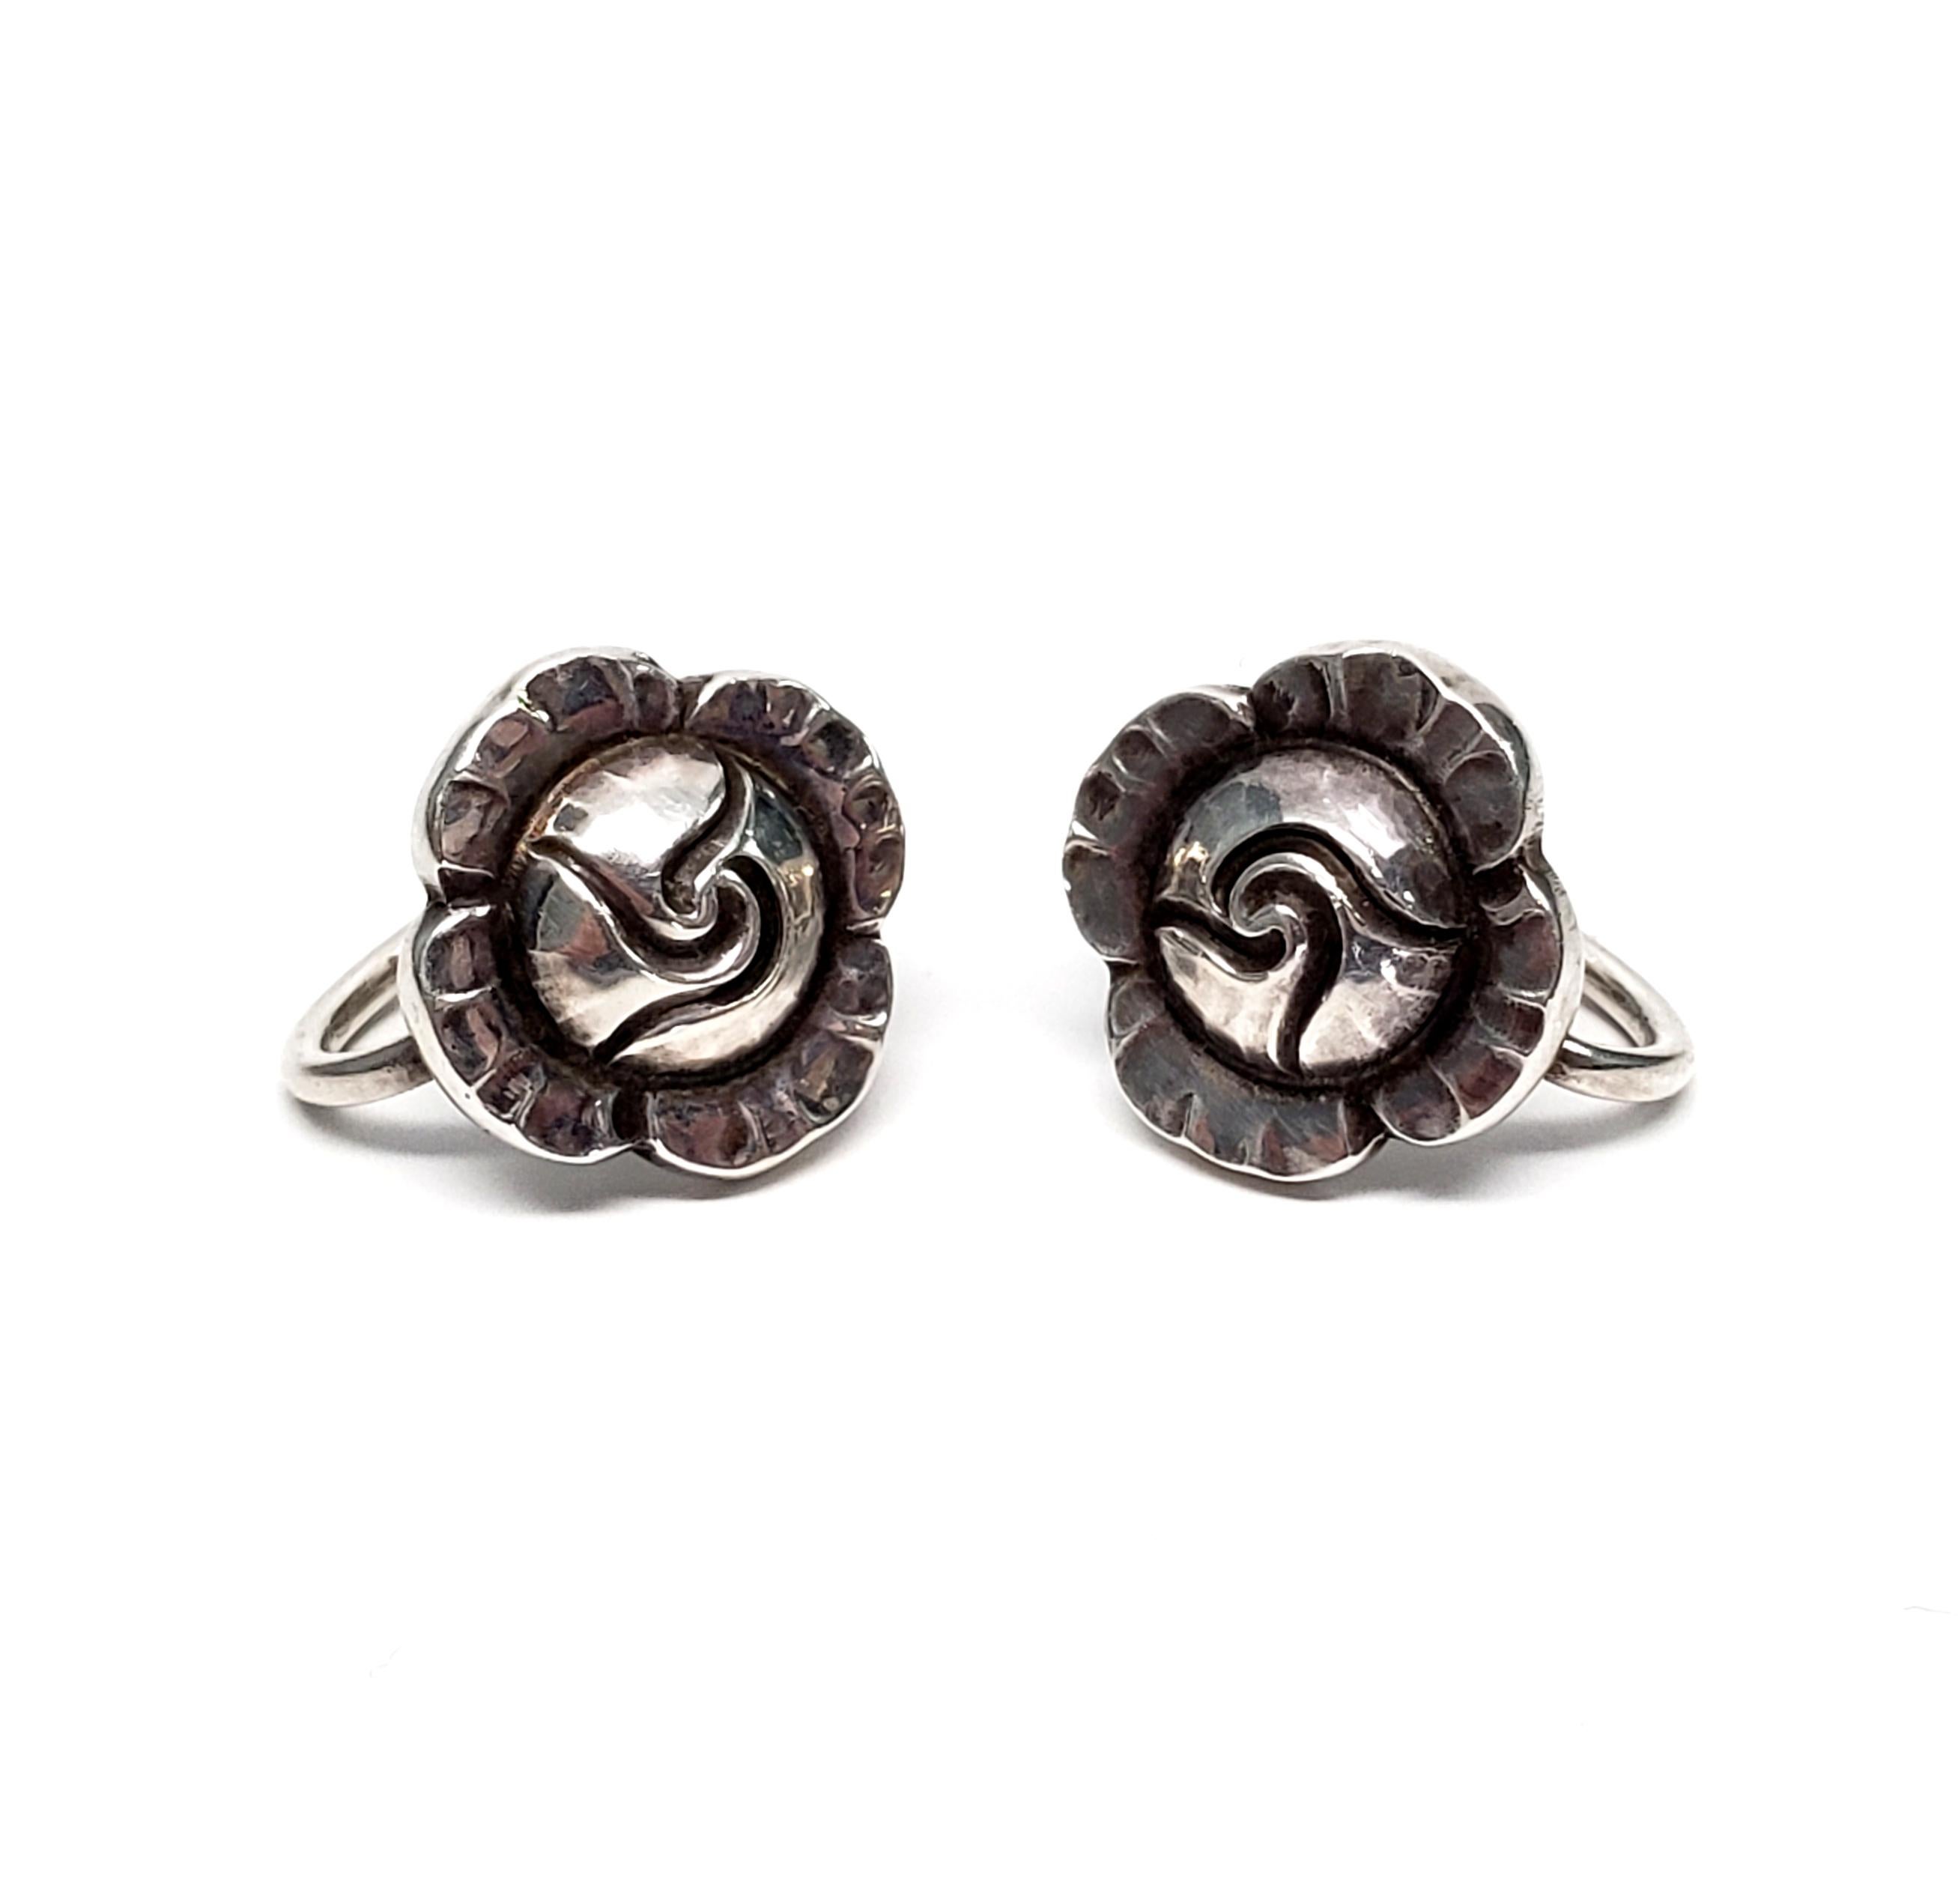 Vintage Georg Jensen sterling silver Flower #89 screw back earrings.

These beautifully detailed flower earrings are inspired by nature motifs, as is typical of Georg Jensen's work.

Measures 1/2